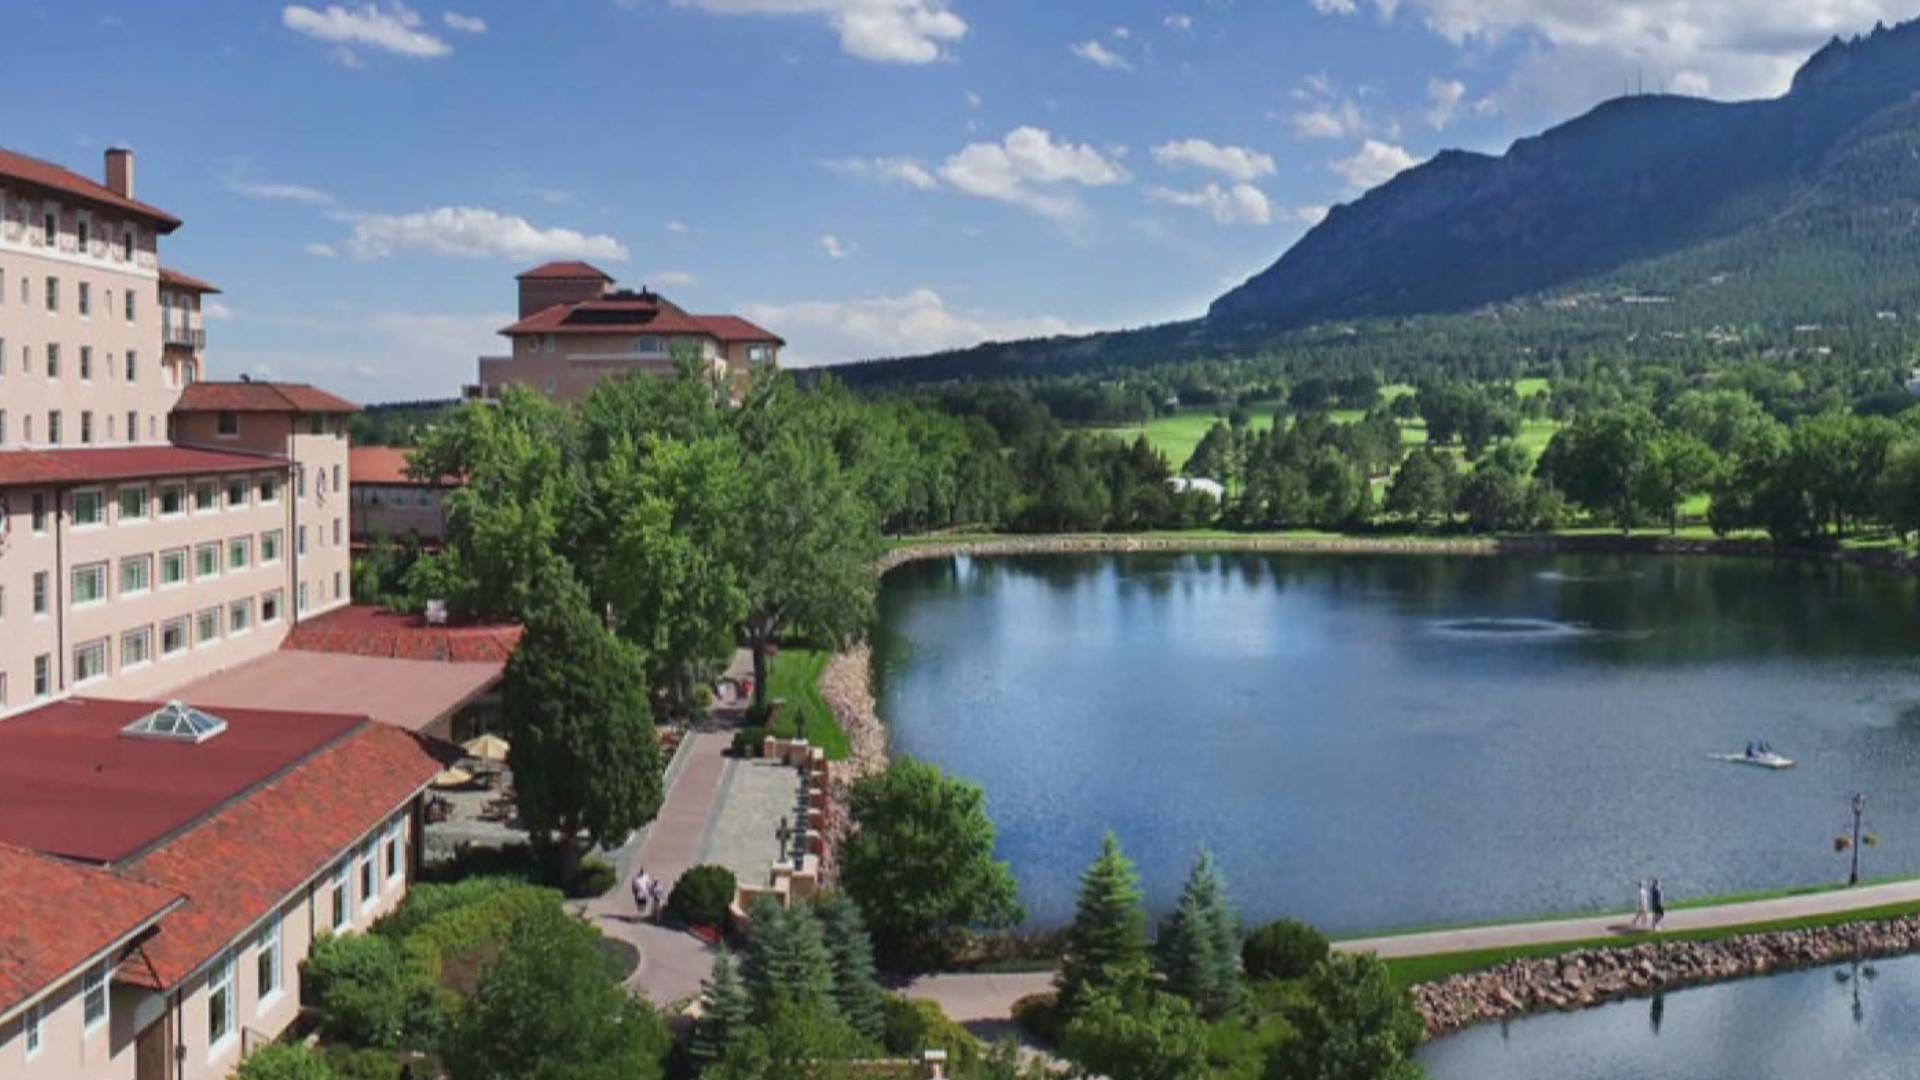 The hotel experience has changed a lot during the COVID-19 pandemic. The Broadmoor in Colorado Springs is combining guest safety with luxury.